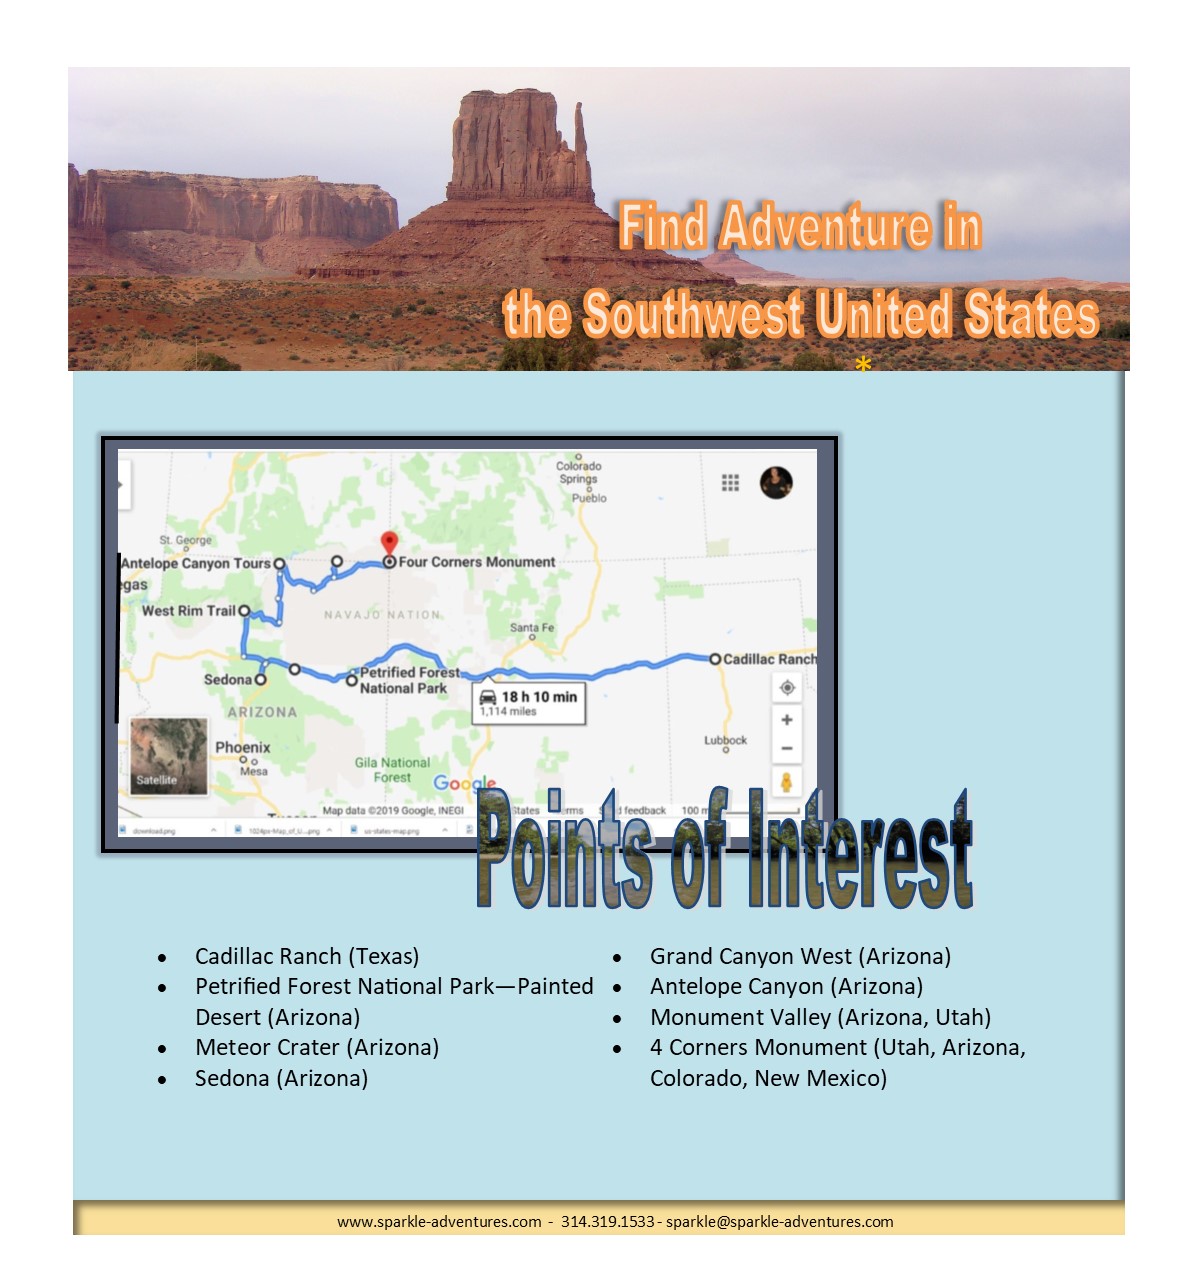 Find Adventure in the Southwest United States - Sparkle Adventures